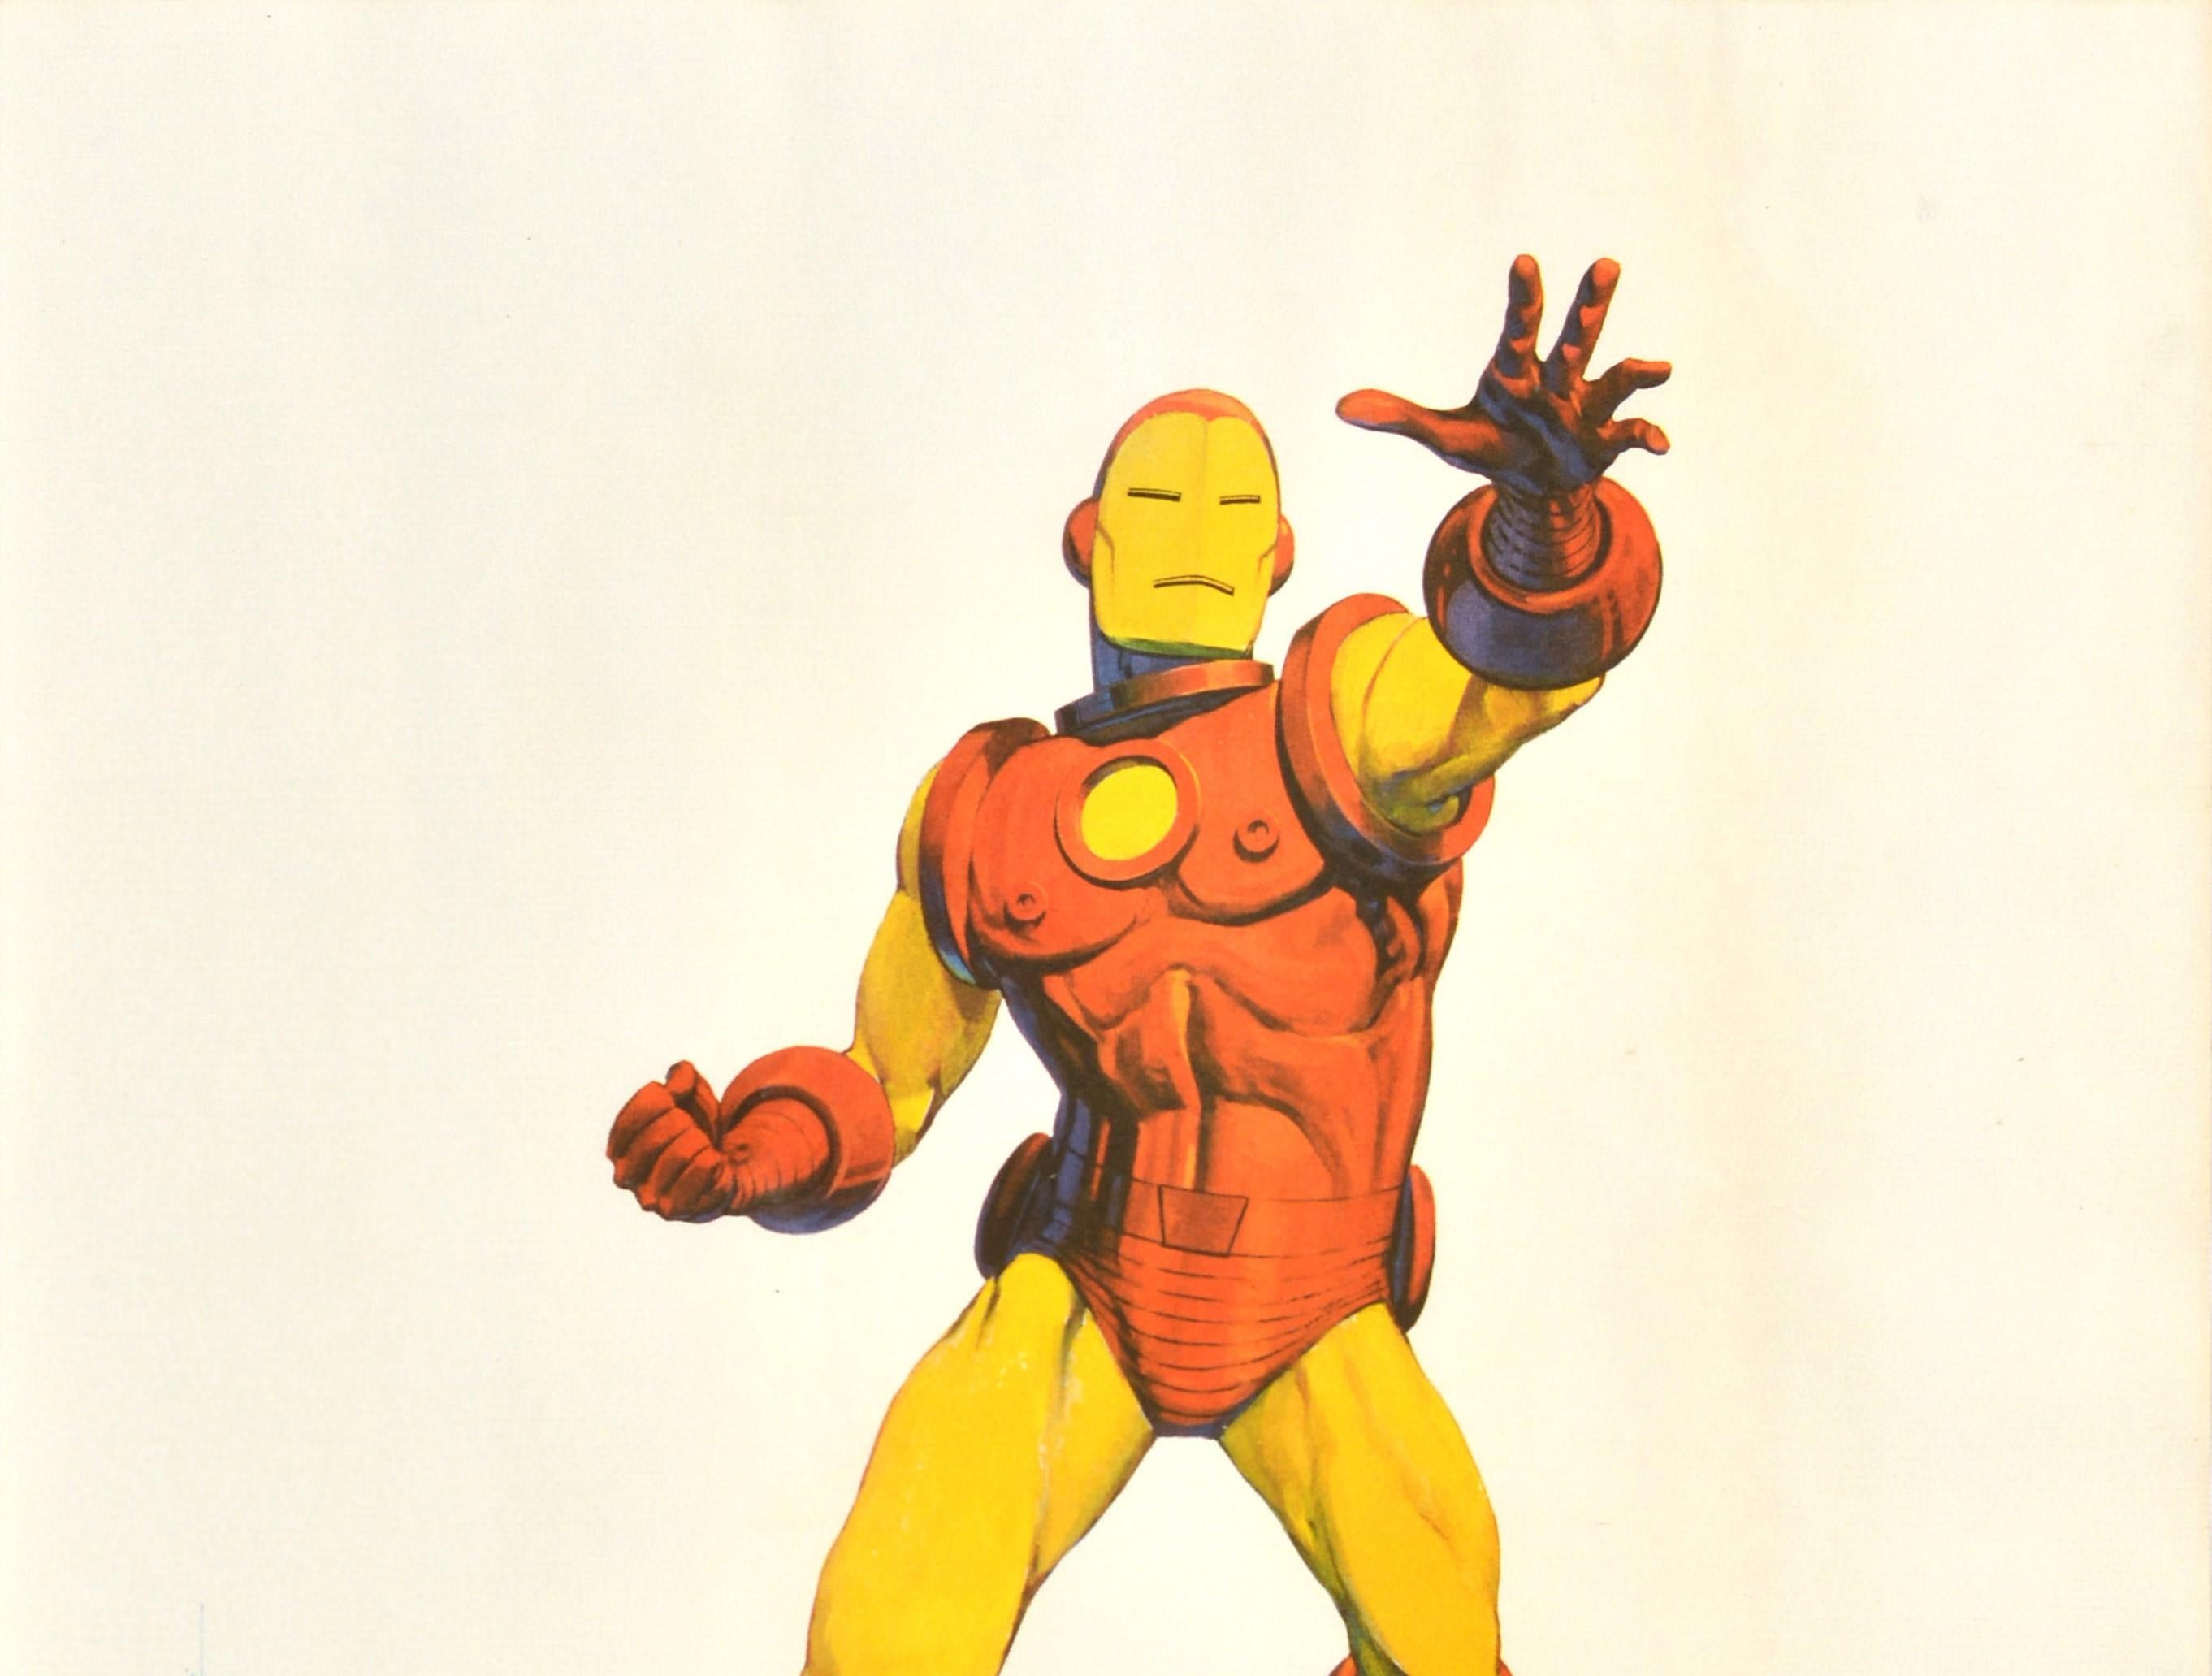 Original vintage animated action adventure movie poster featuring the Marvel Comics superhero Iron Man reaching forward with his other hand in a clenched fist, the title in bold blue text below. Created by Stan Lee with Larry Lieber and cartoon